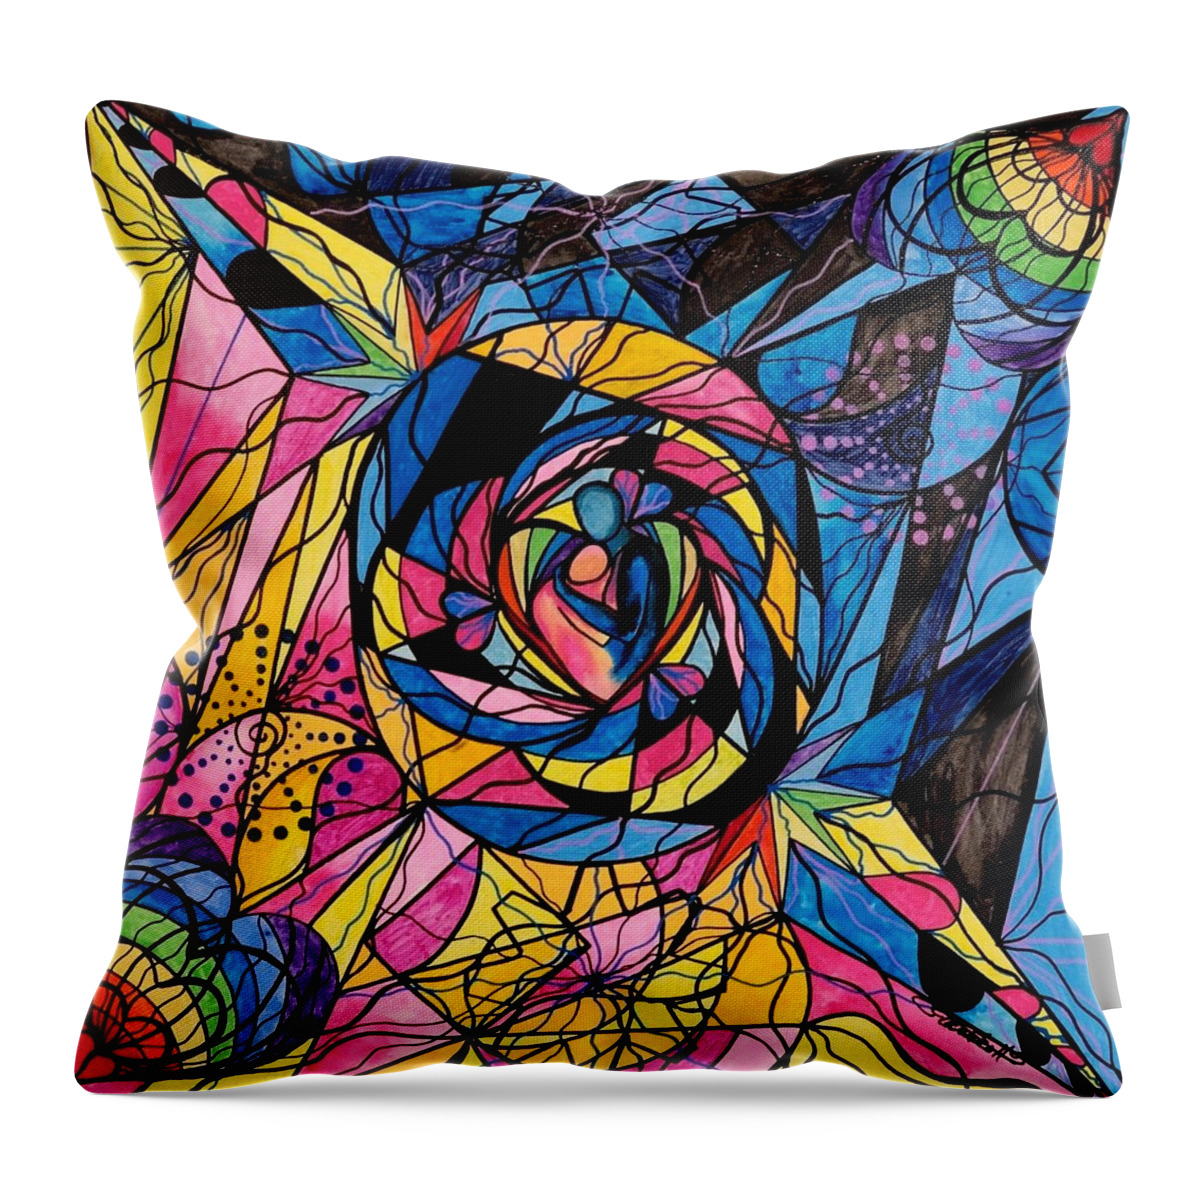 Kindred Soul Throw Pillow featuring the painting Kindred Soul by Teal Eye Print Store